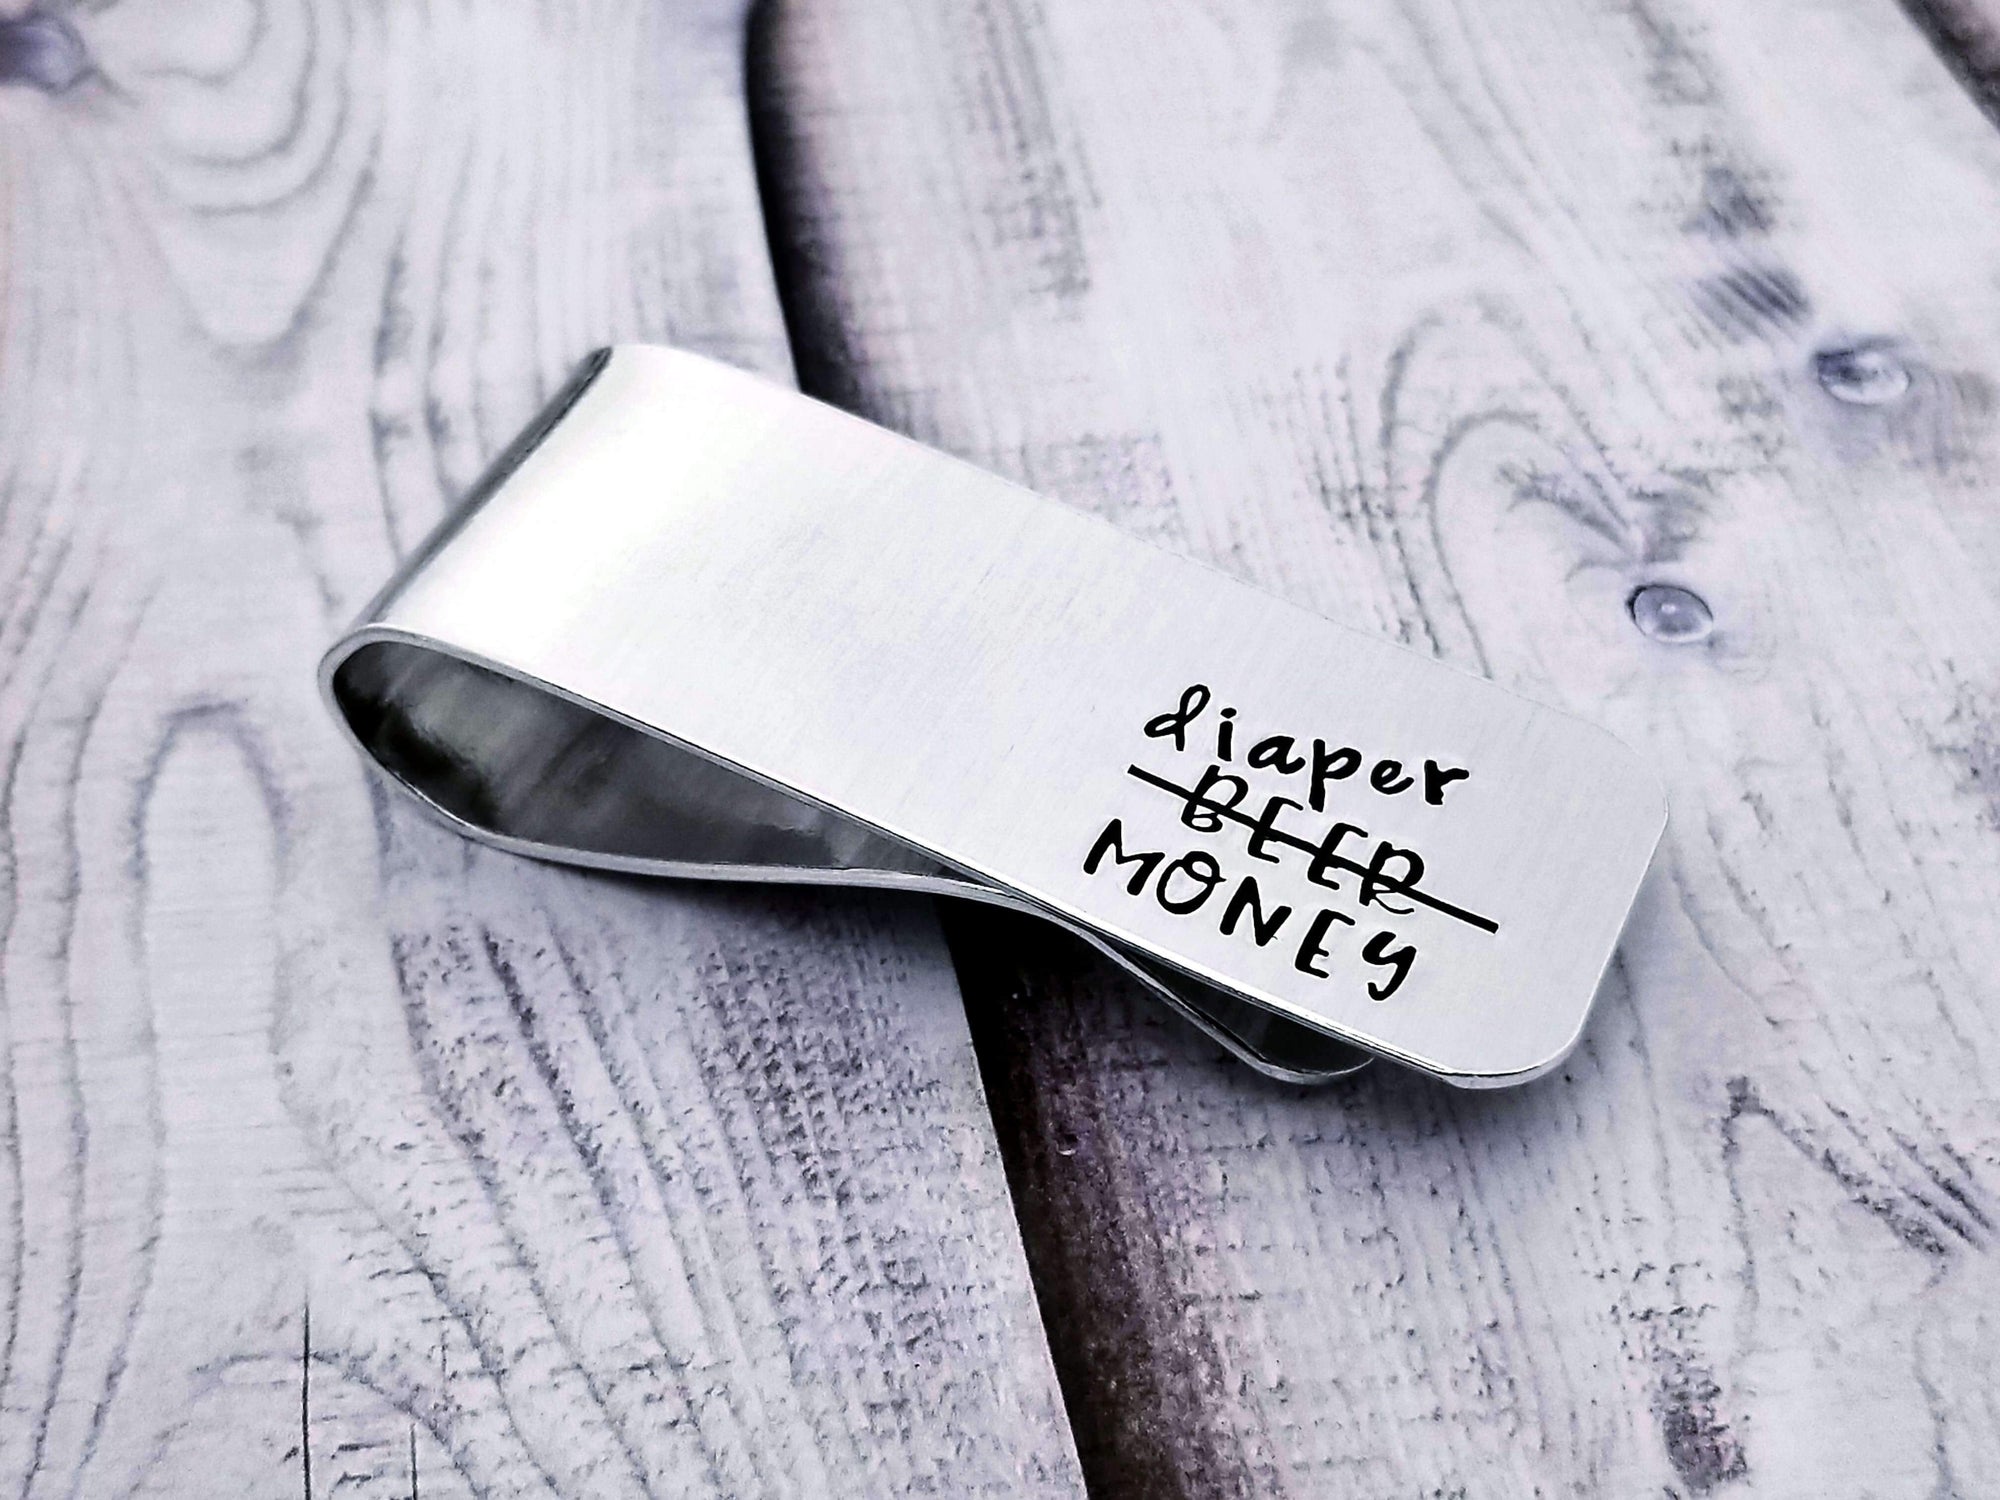 New Dad Gift, Diaper Money Gift, Beer Money Clip, Custom Money Clip, Funny Dad Gift #1 Dad, Present for Dad, Fathers Day Gift, Gift for Dad